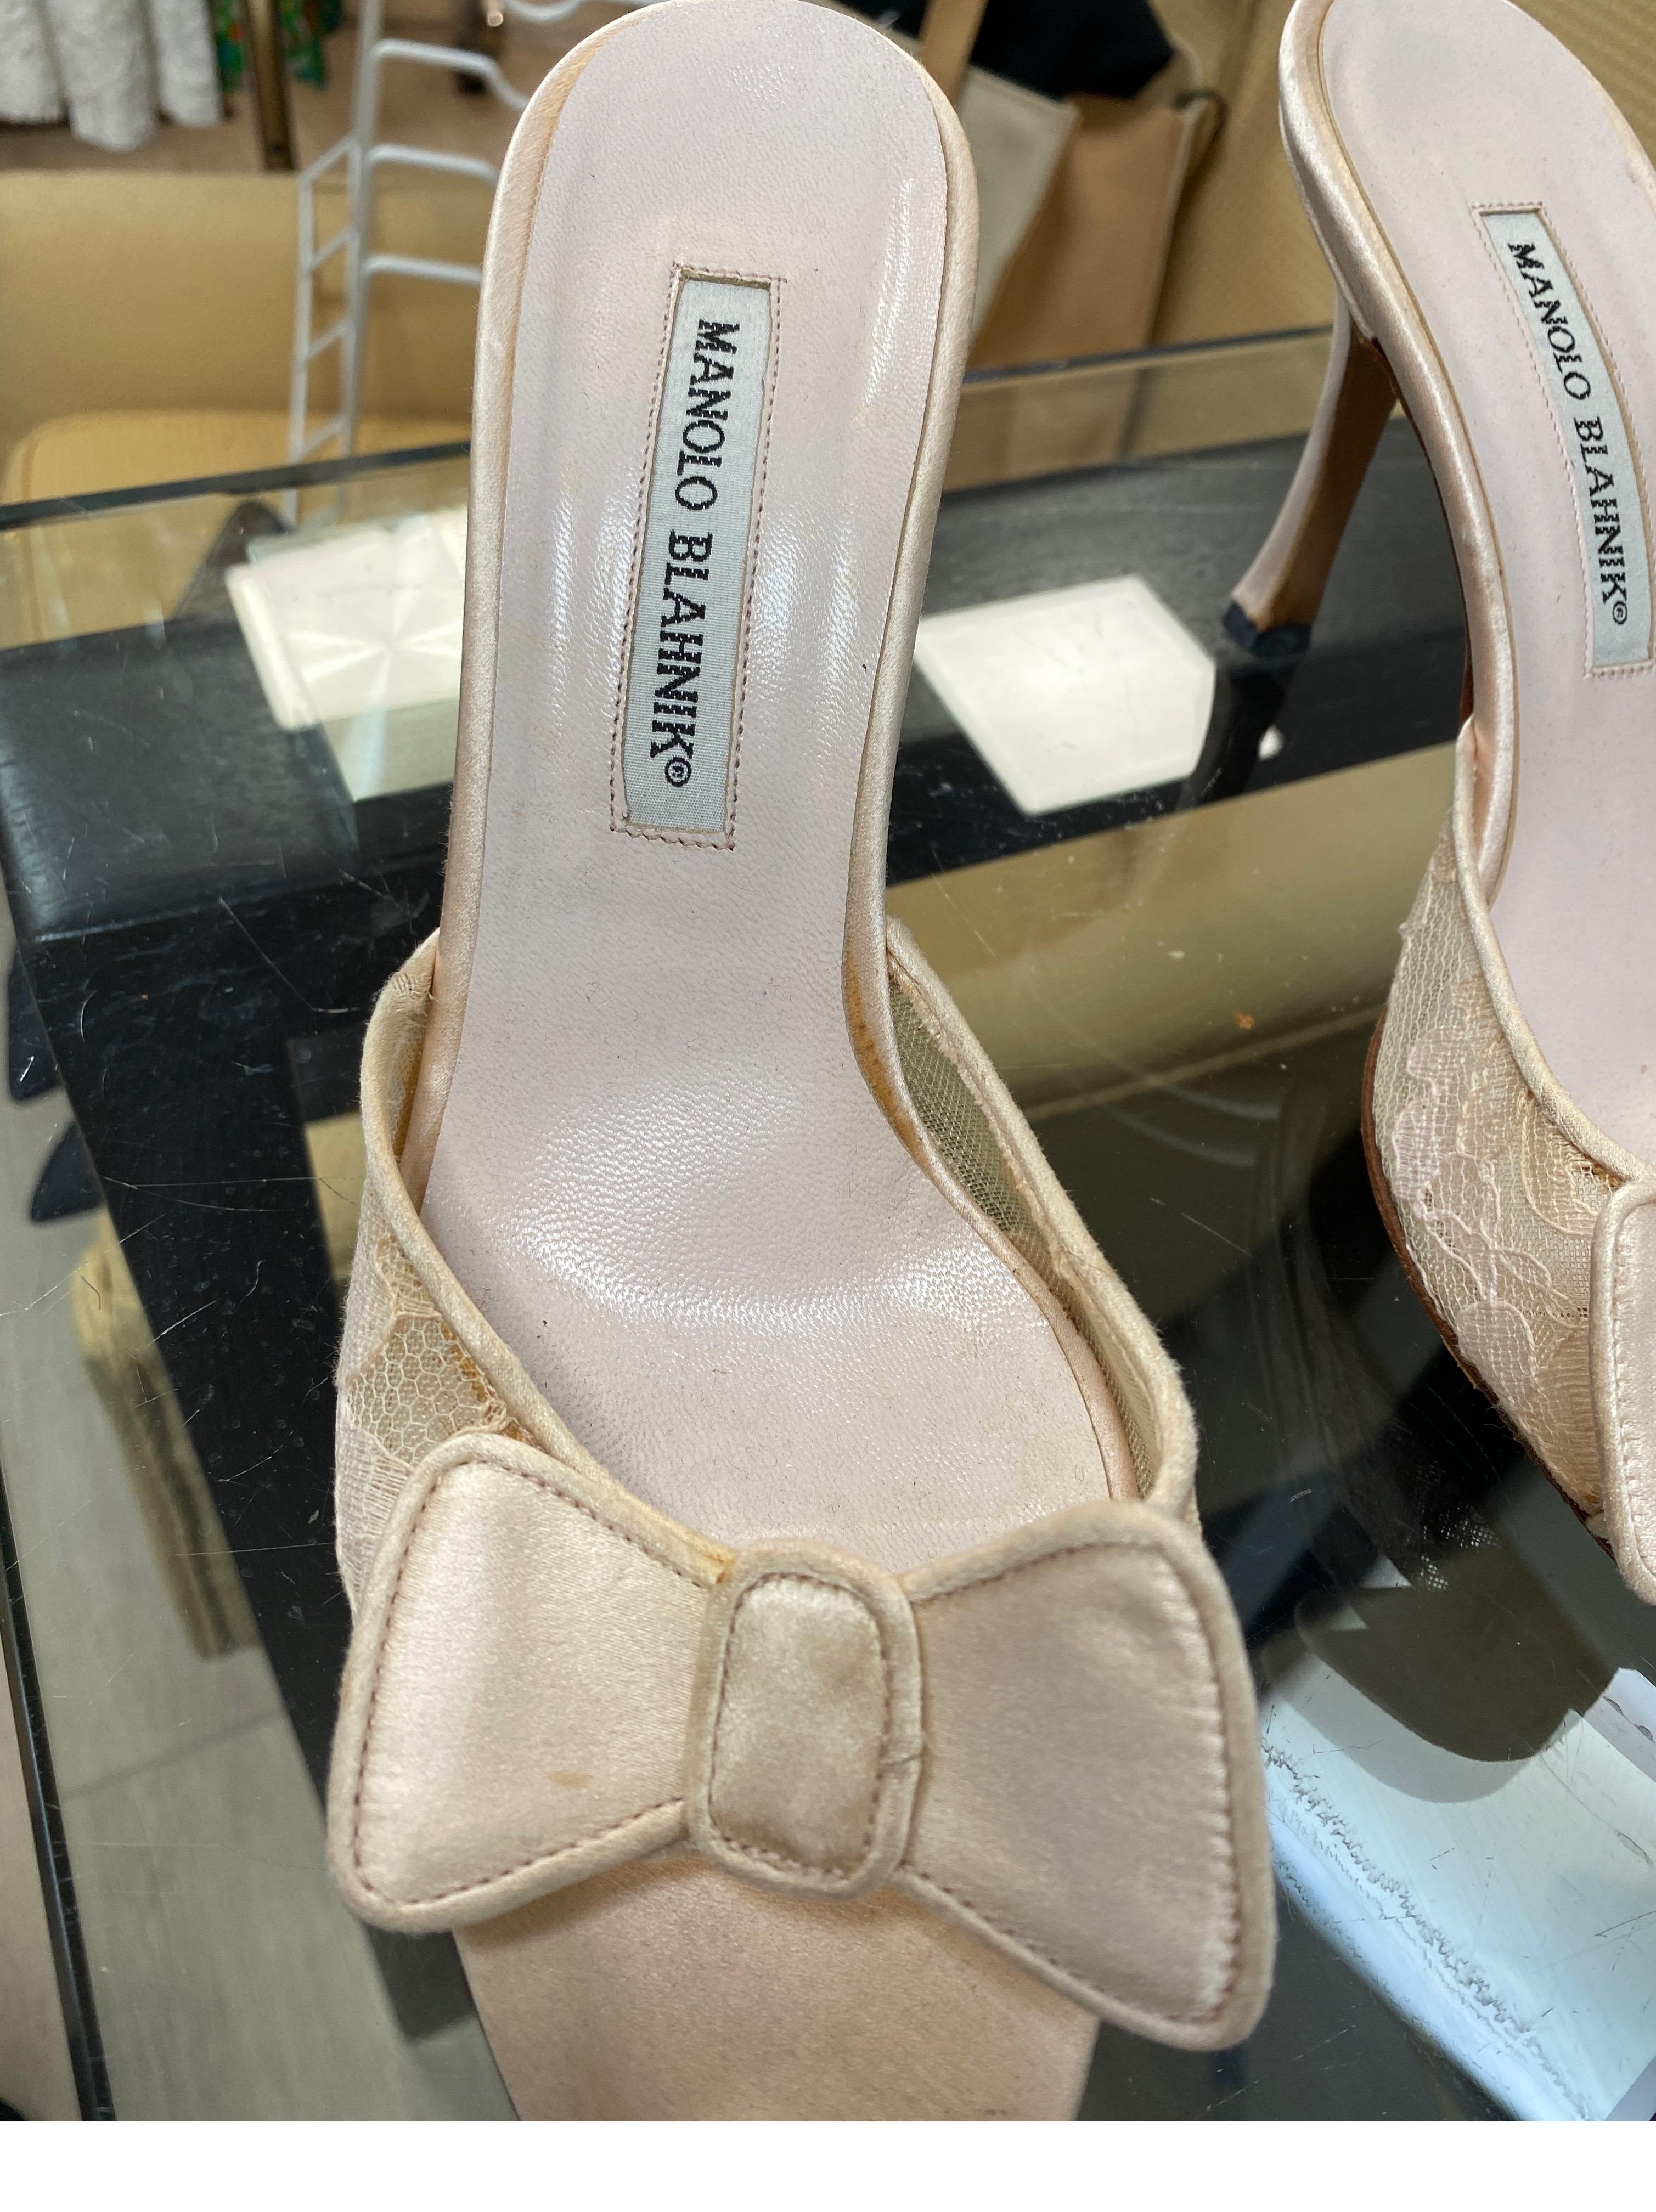 Manolo Blahnik Pink Lace Slides with Satin Bow In Good Condition For Sale In West Palm Beach, FL